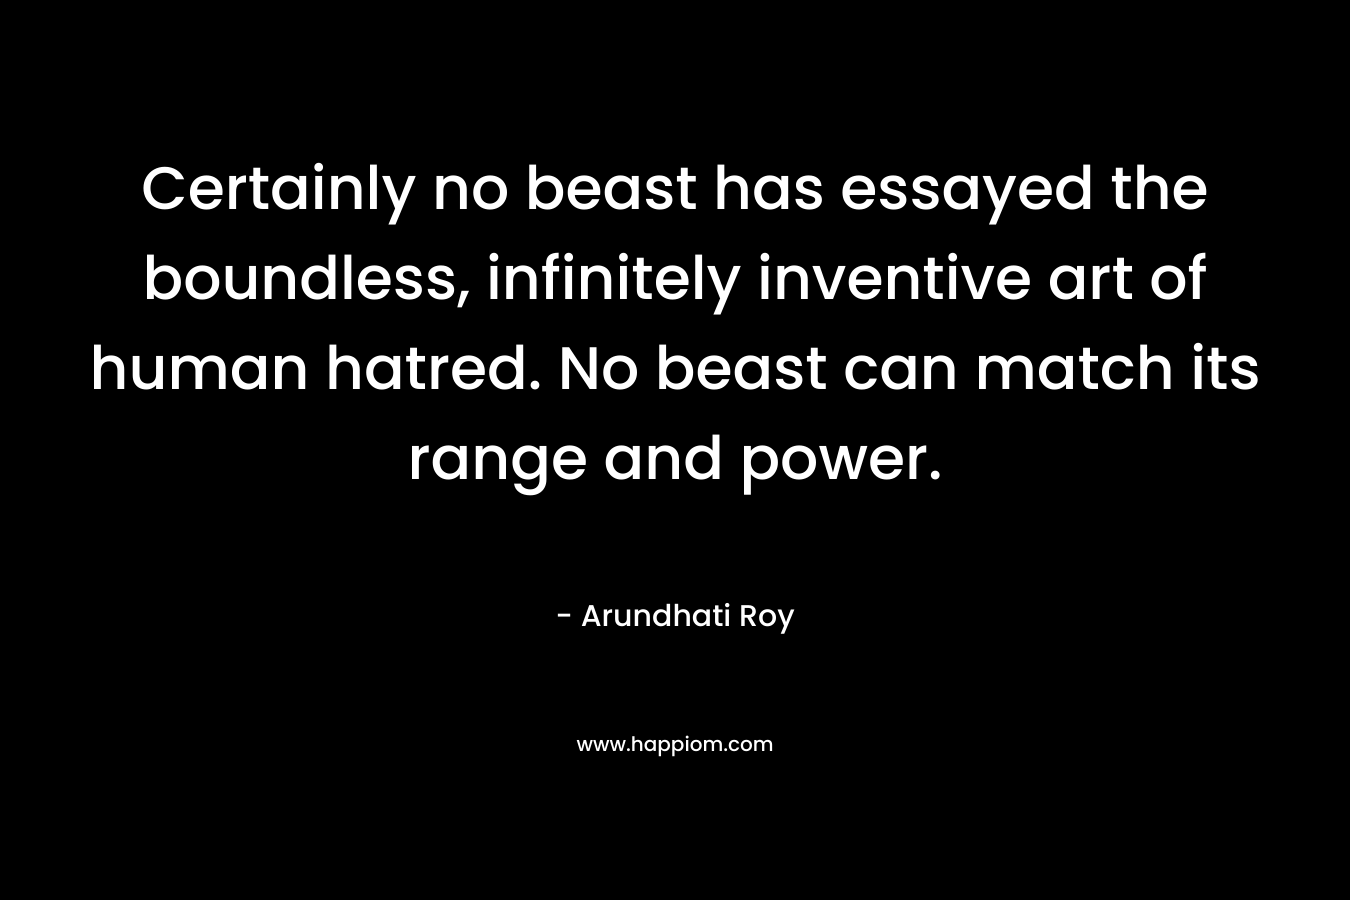 Certainly no beast has essayed the boundless, infinitely inventive art of human hatred. No beast can match its range and power.